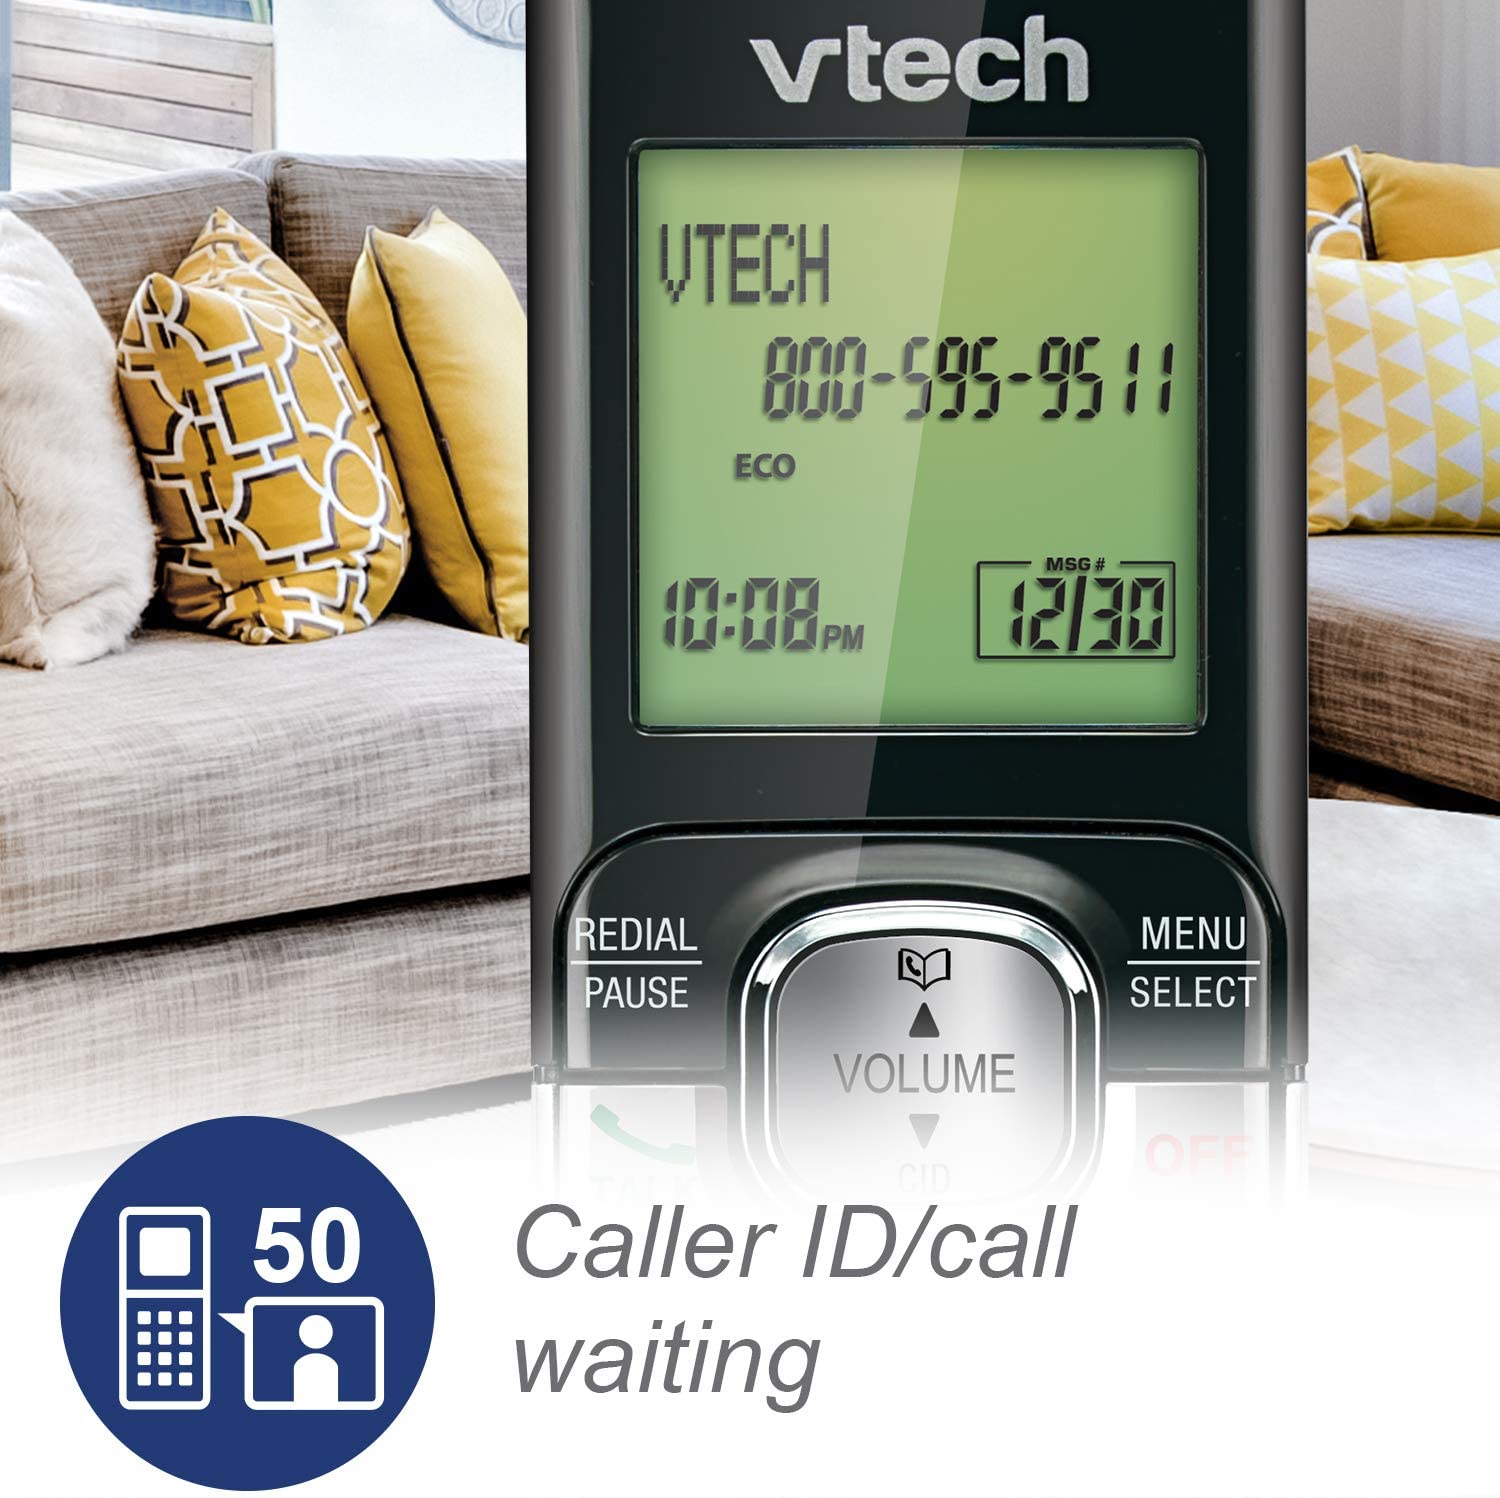 VTech CS6529-2 DECT 6.0 Phone Answering System, Silver/Black -  with Caller ID/Call Waiting, 2 Cordless Handsets